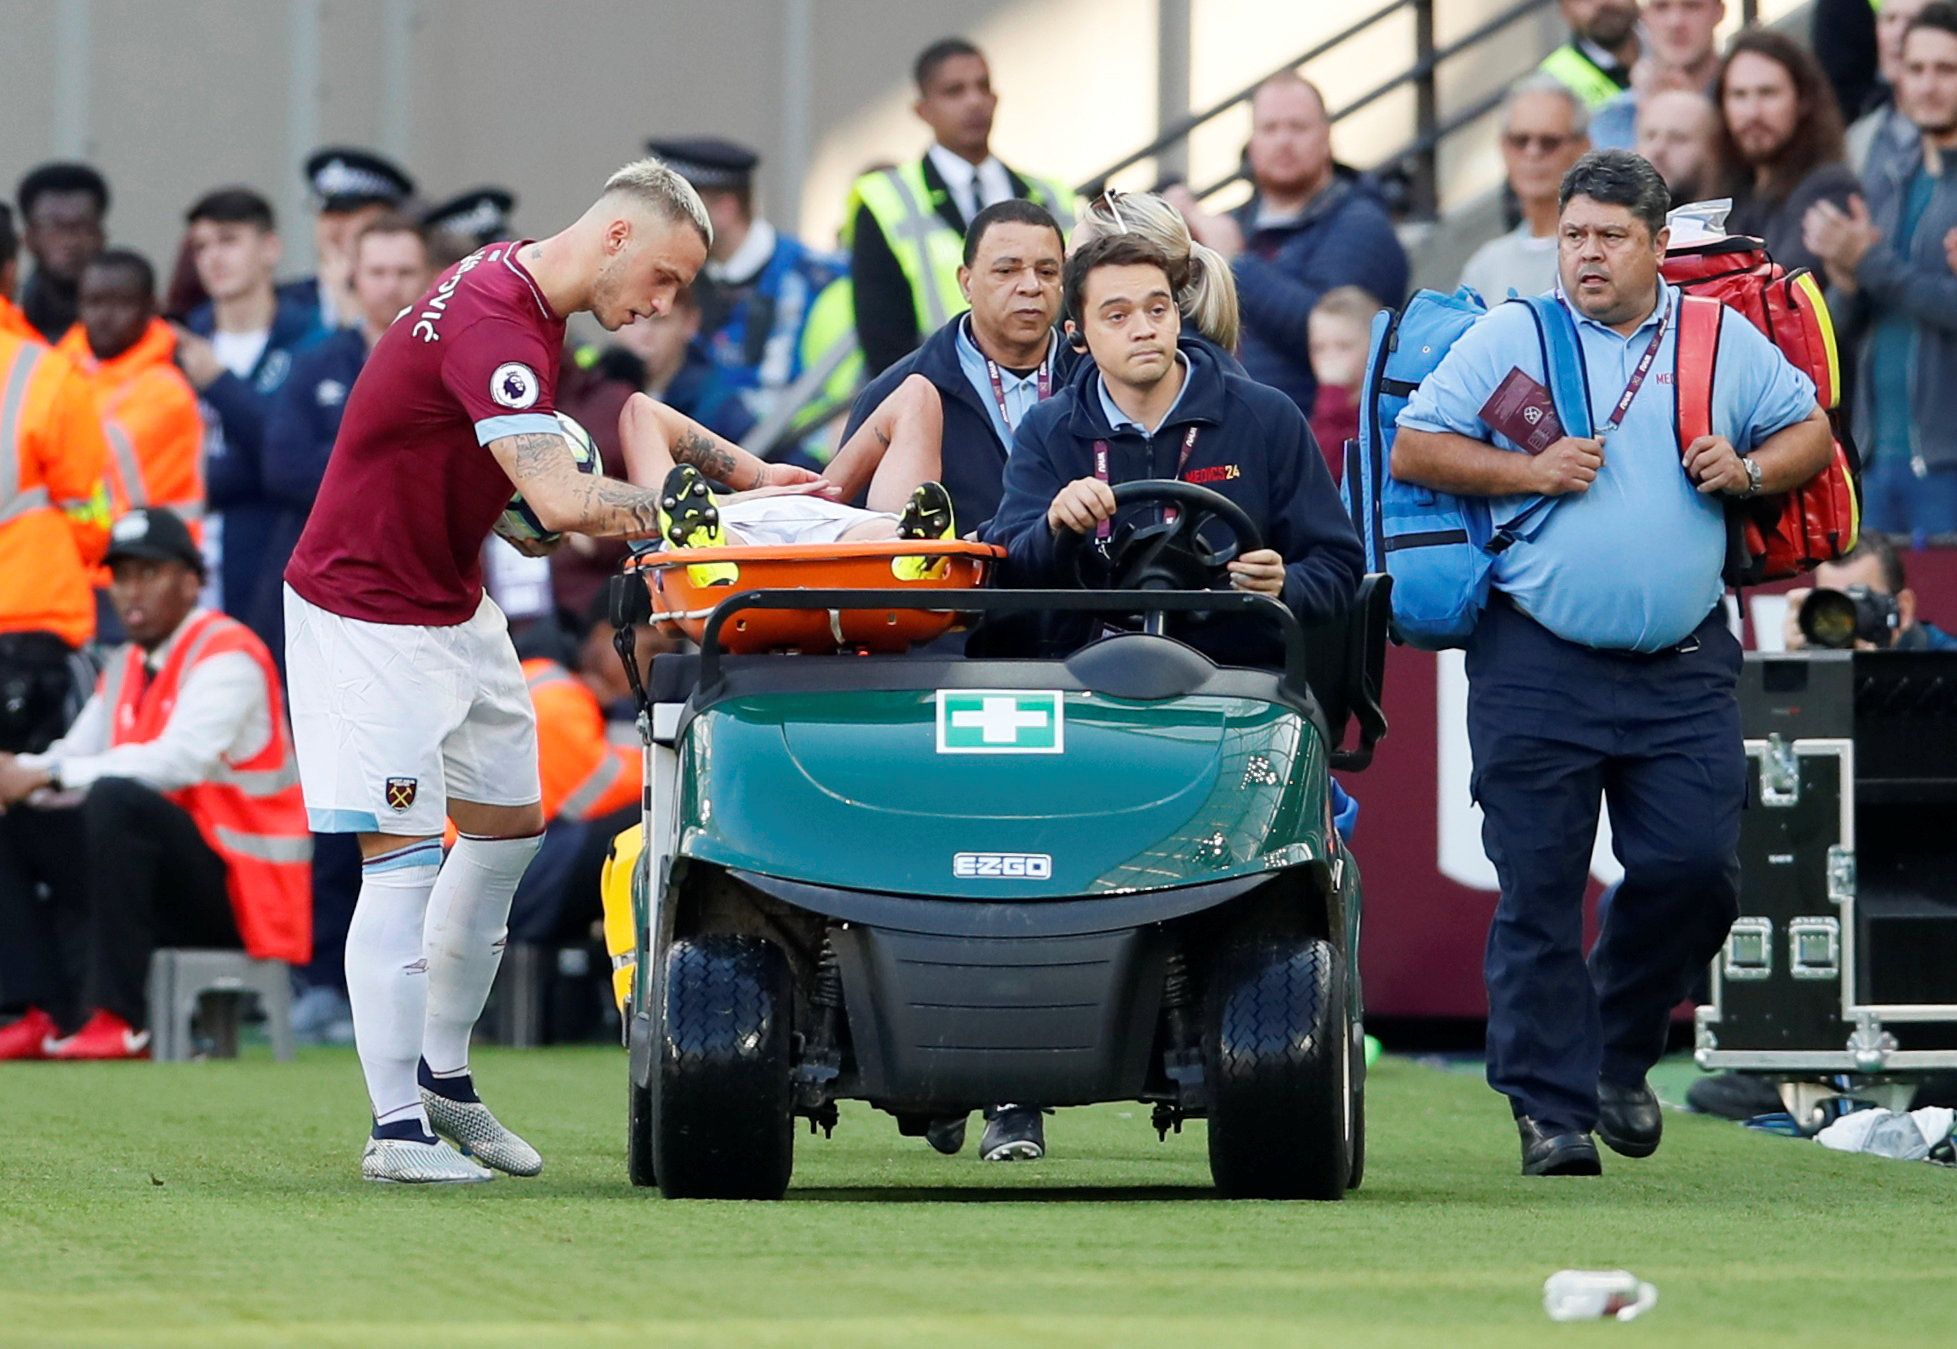 Soccer Football - Premier League - West Ham United v Tottenham Hotspur - London Stadium, London, Britain - October 20, 2018  West Ham's Marko Arnautovic checks on Andriy Yarmolenko as he is stretchered off the pitch after sustaining an injury   REUTERS/David Klein  EDITORIAL USE ONLY. No use with unauthorized audio, video, data, fixture lists, club/league logos or 